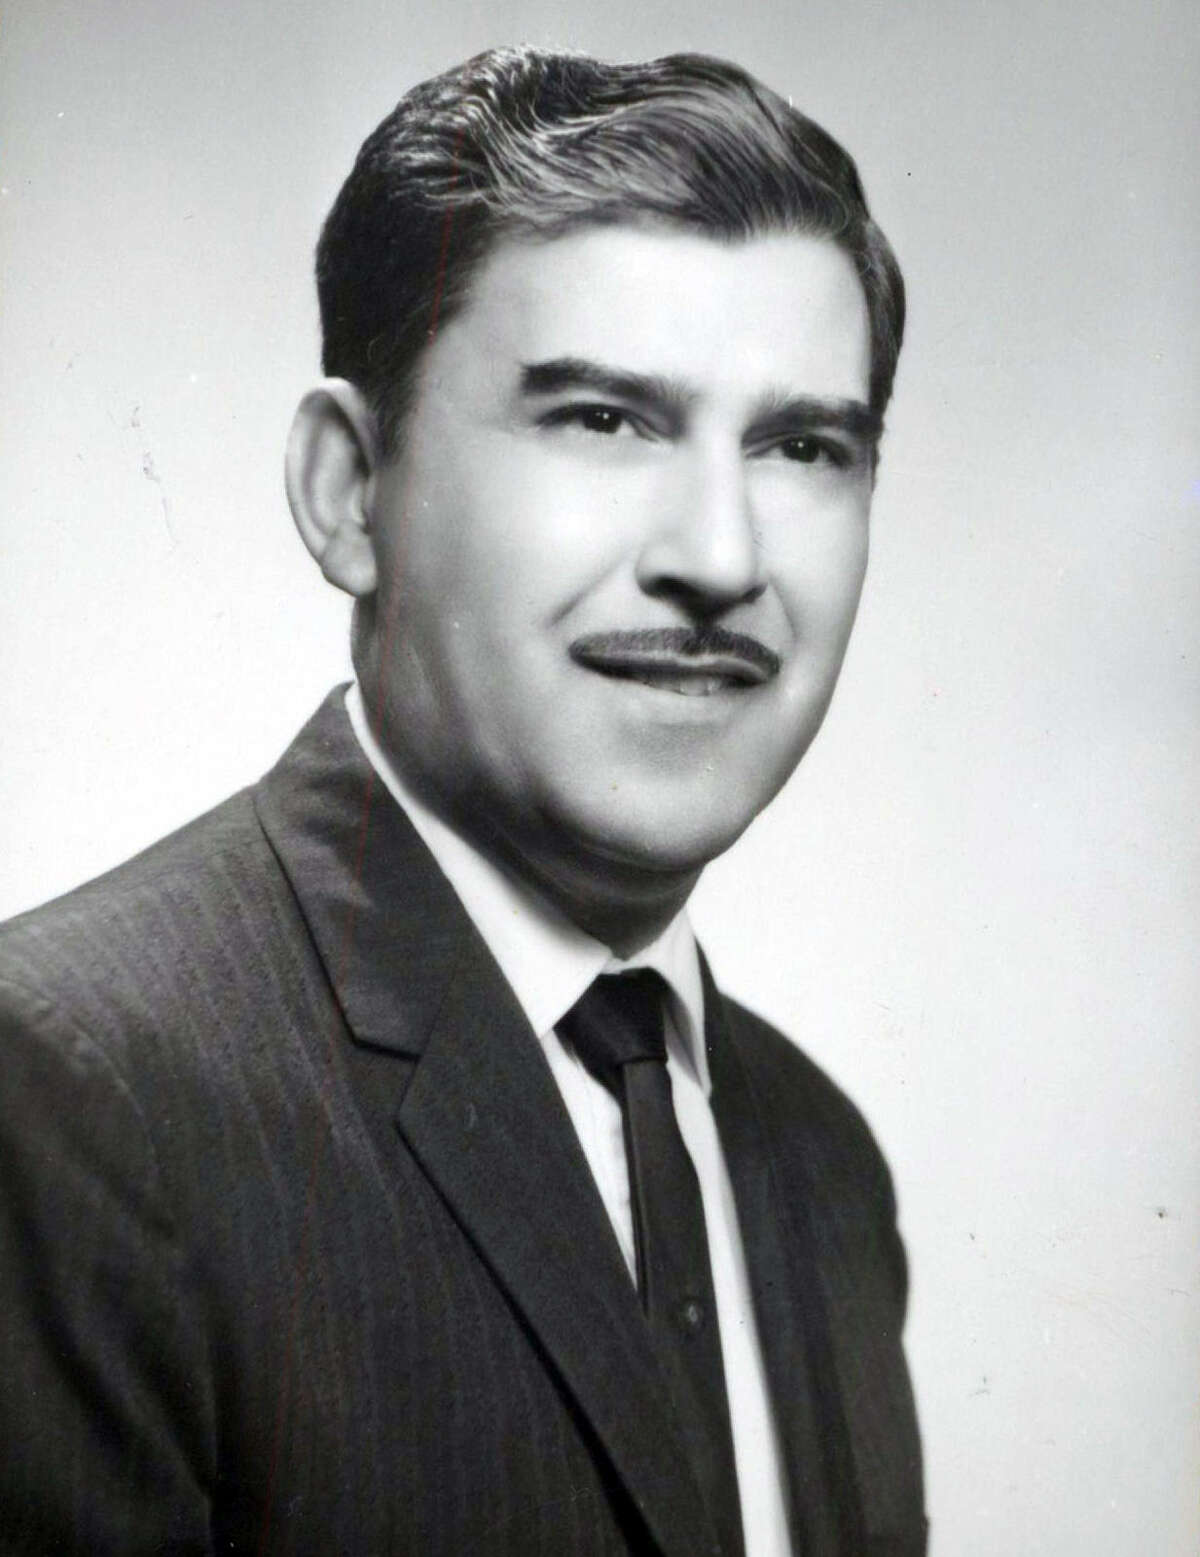 Felix B. Trevino was elected to the San Antonio City Council in 1965 and served until 1972.